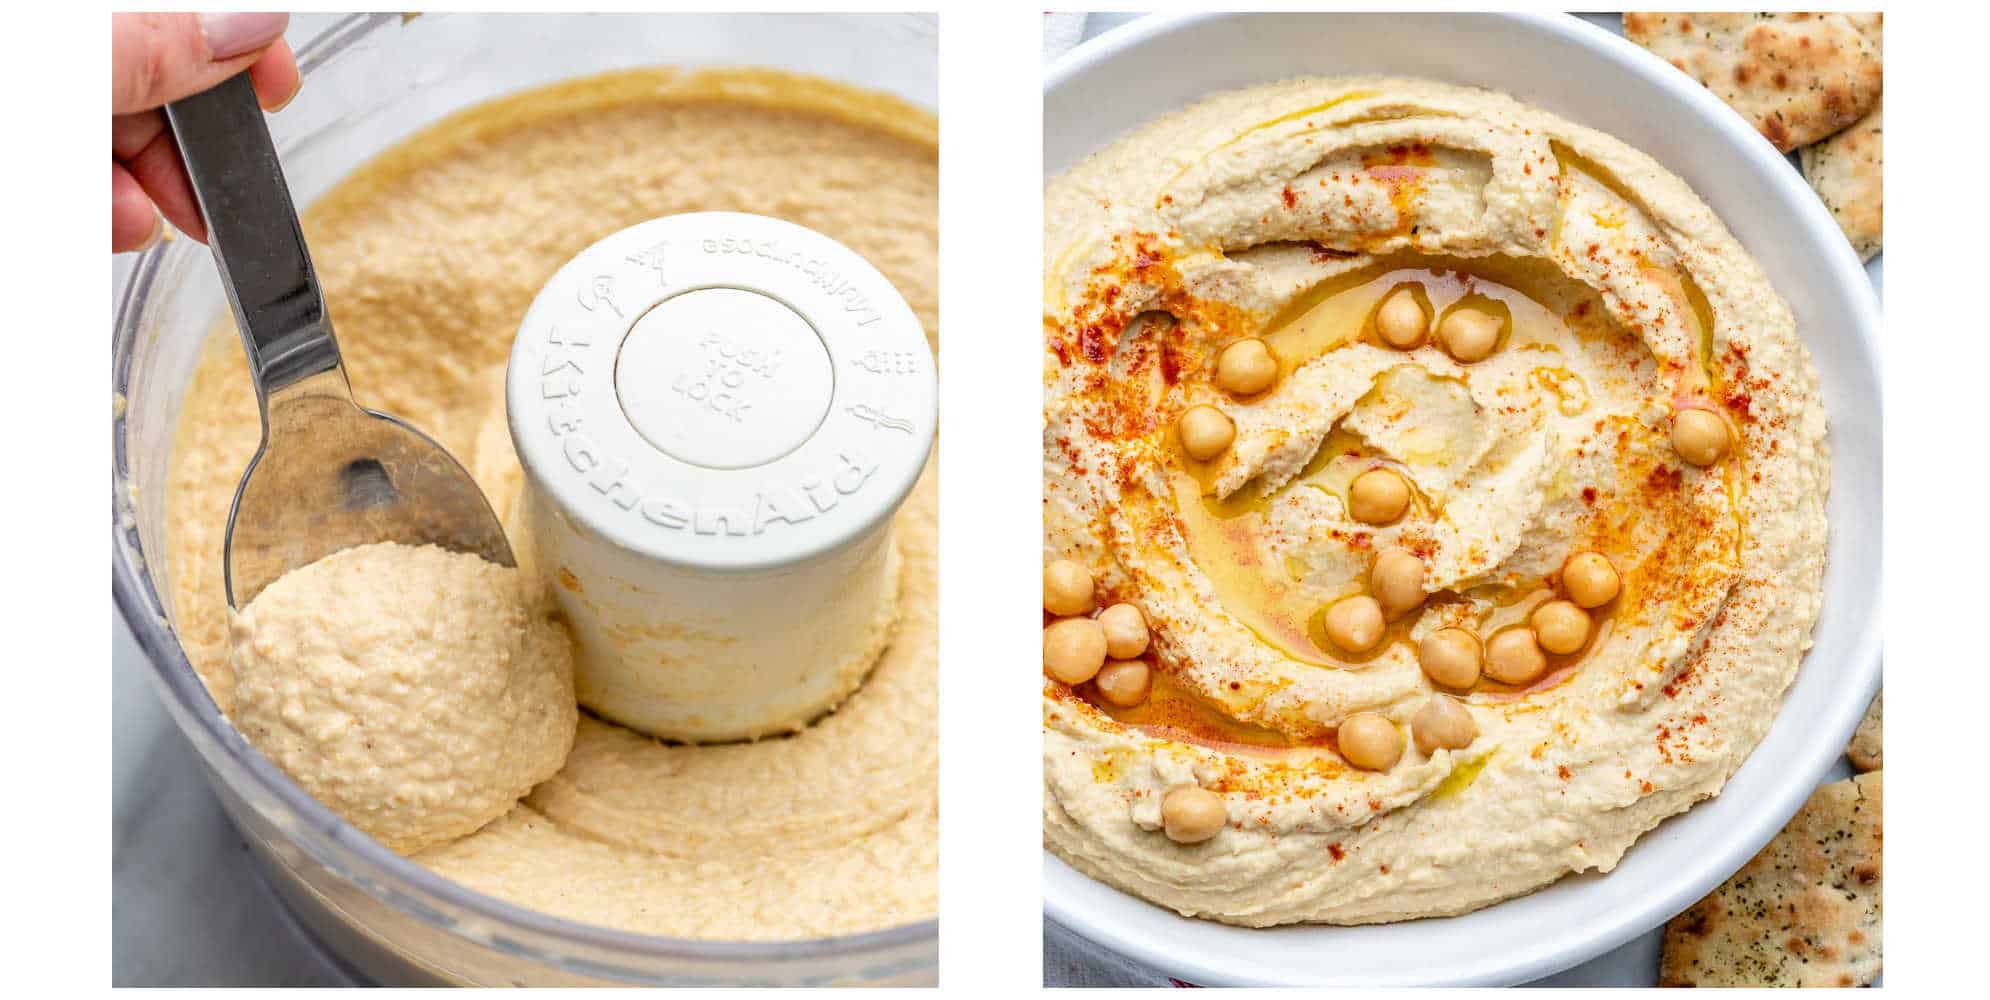 easy homemade hummus recipe from scratch